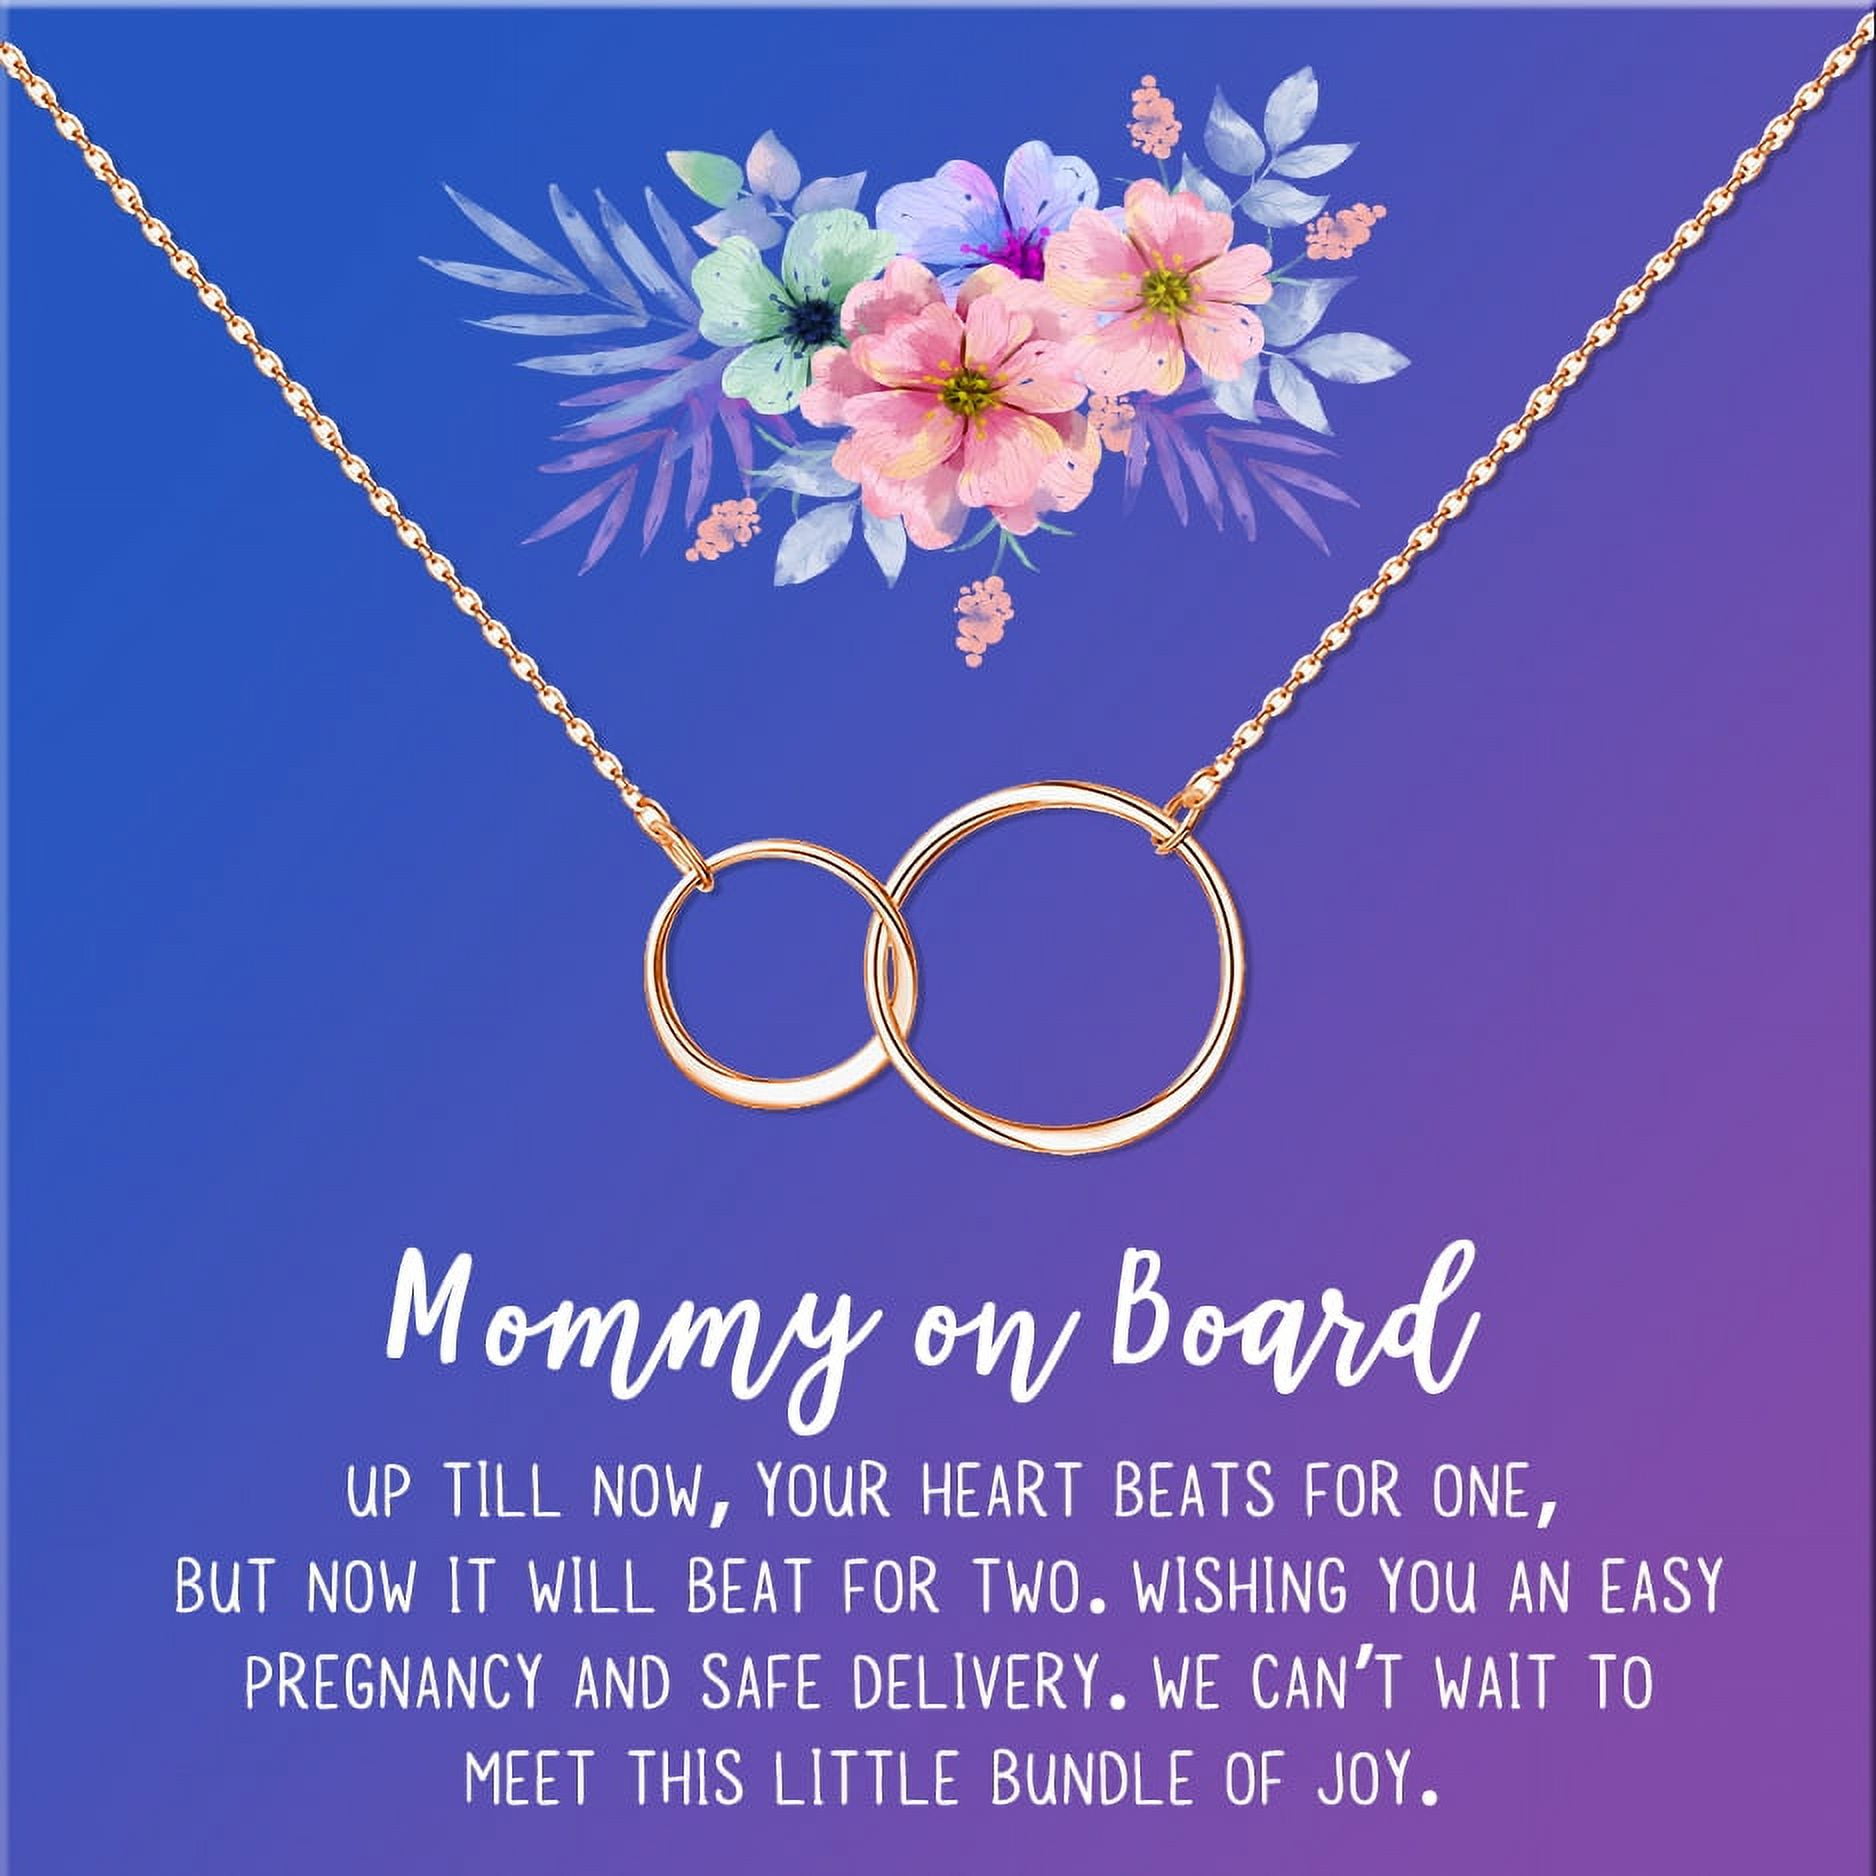 Christmas gifts for mom, mom gifts, mom necklace - SO-9572573 - ZILORRA